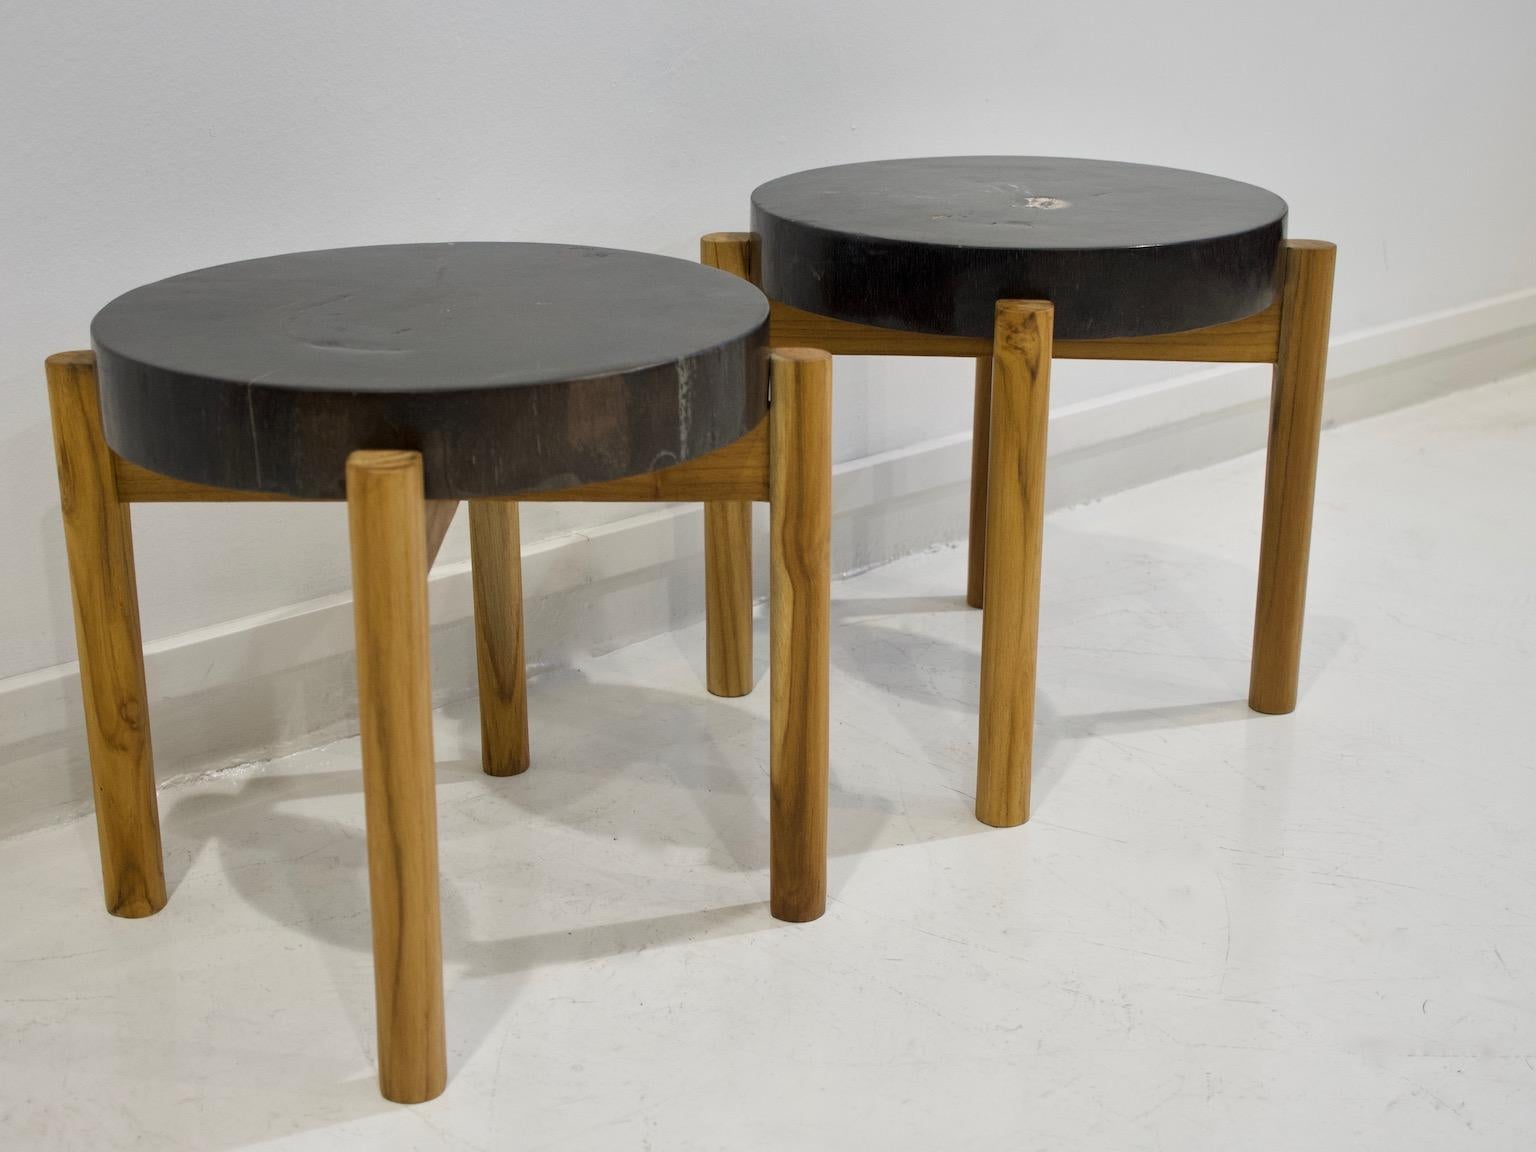 Pair of Side Tables with Wooden Feet and Dark Petrified Wood Top 2